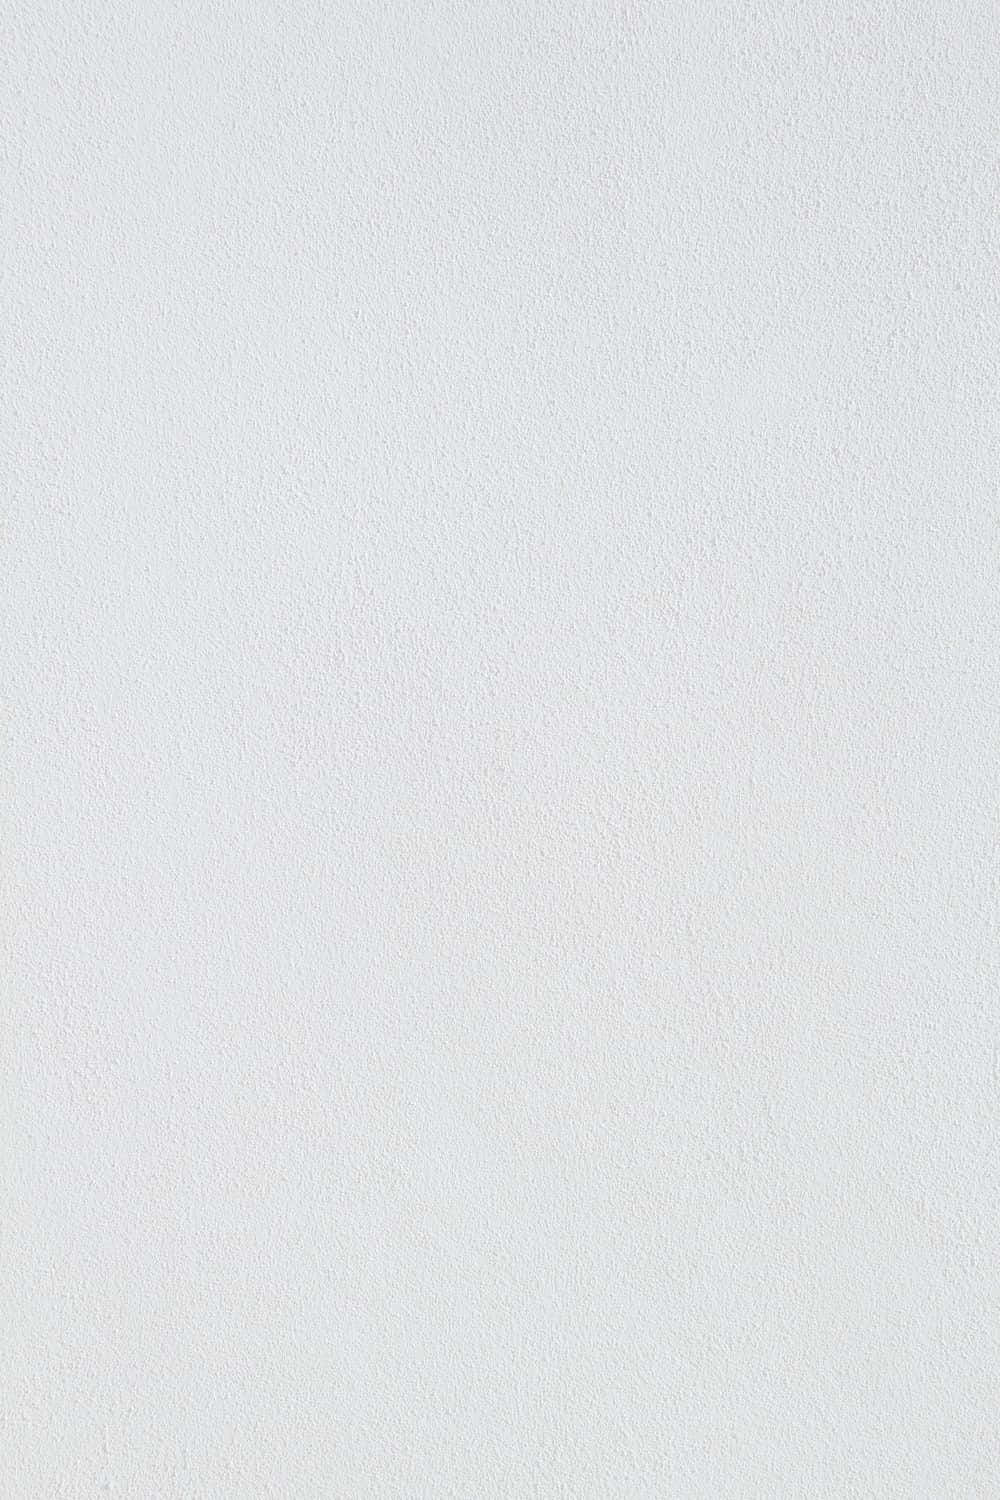 A White Wall With A White Tv Screen